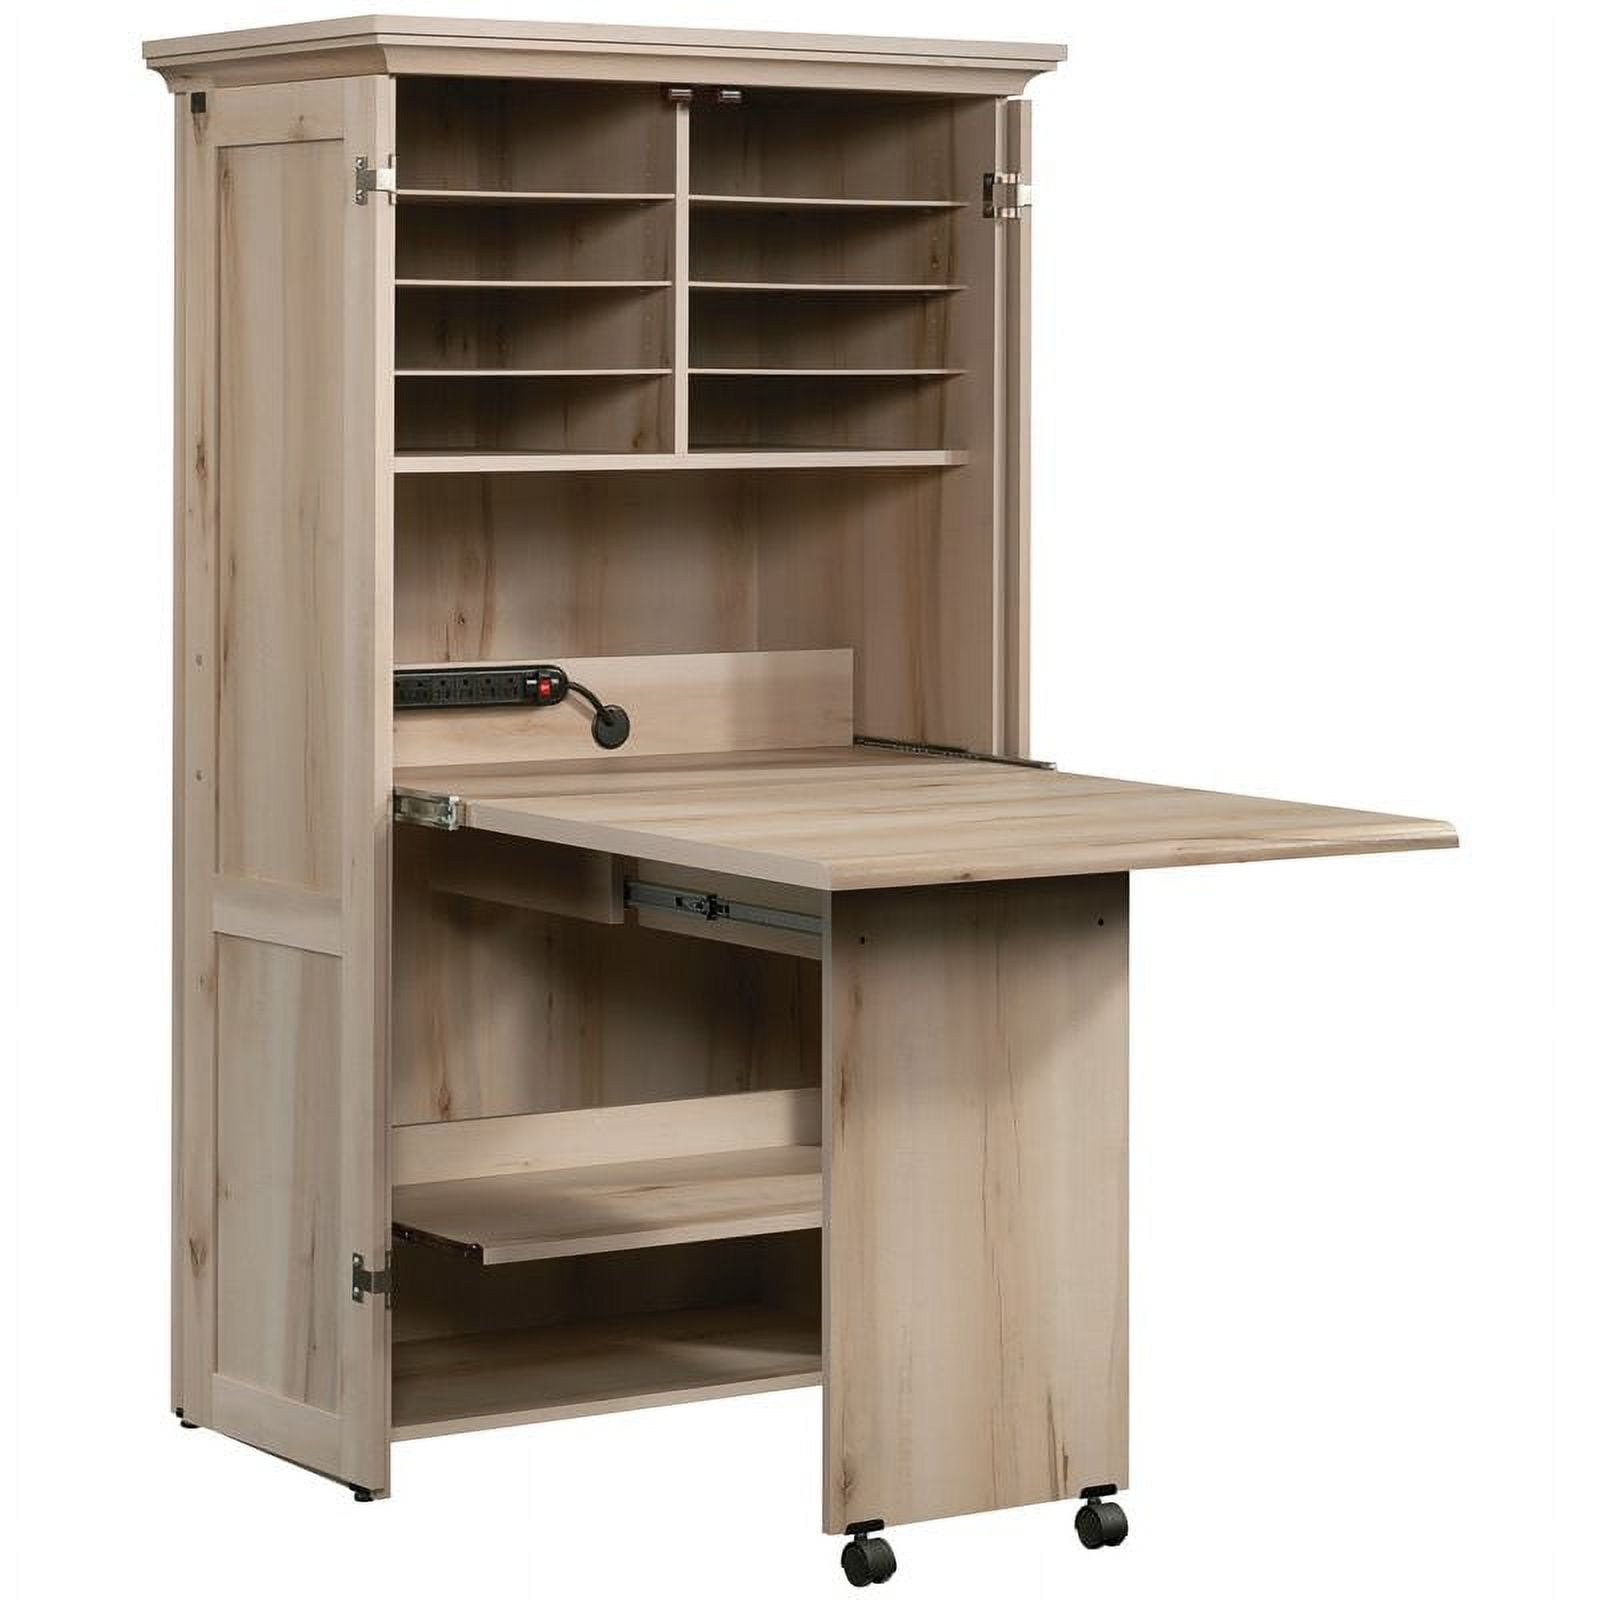 Account Suspended  Craft armoire, Fold out table, Craft storage cabinets